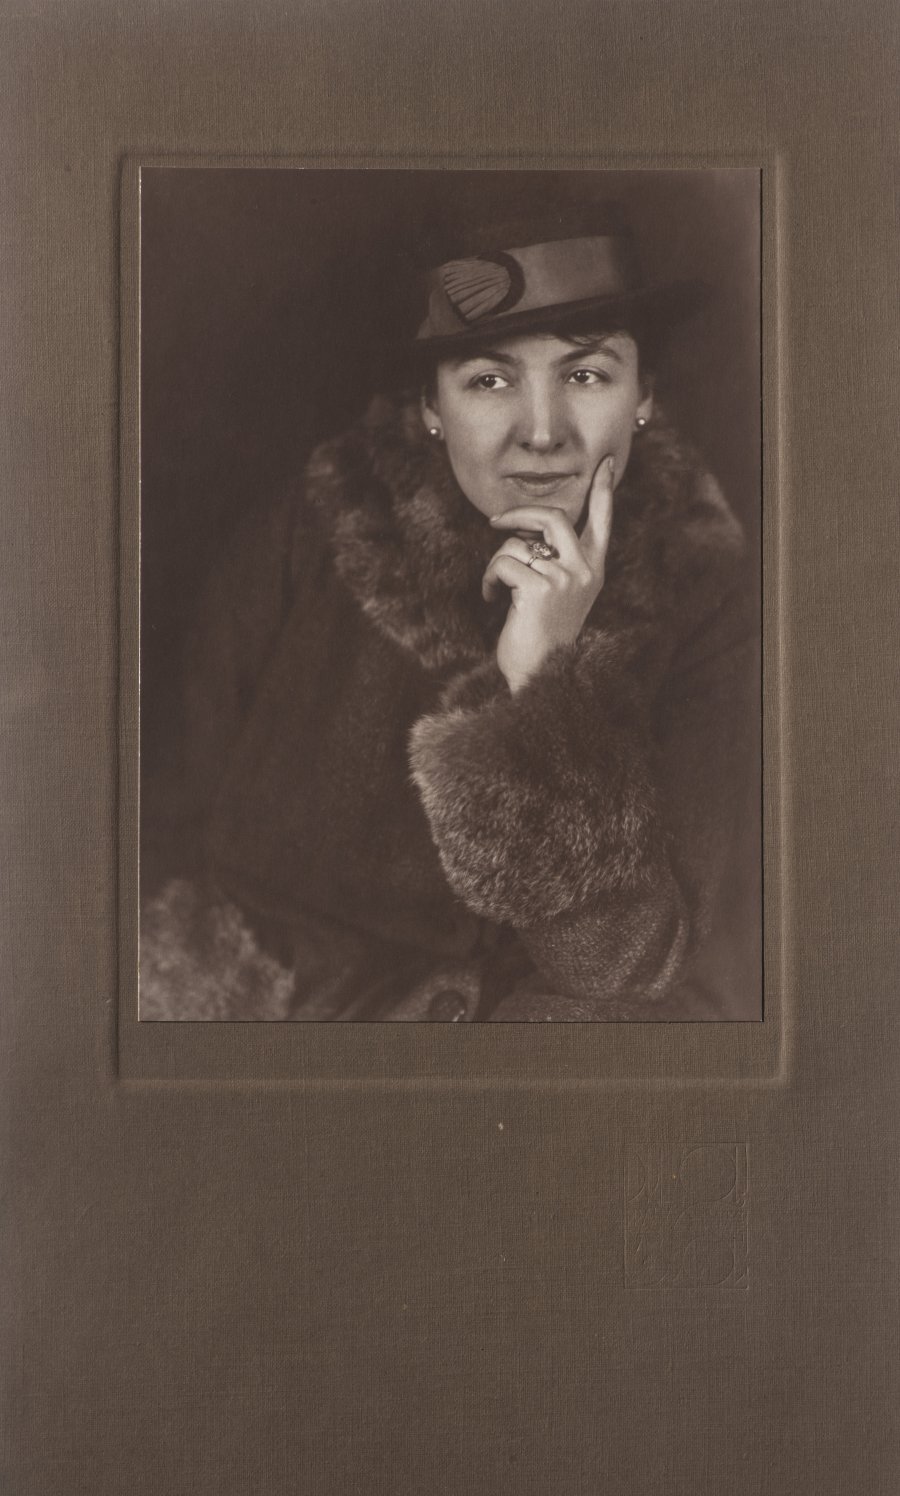 COLLECTION OF PORTRAITS OF MADAME HLOUCHOVÁ